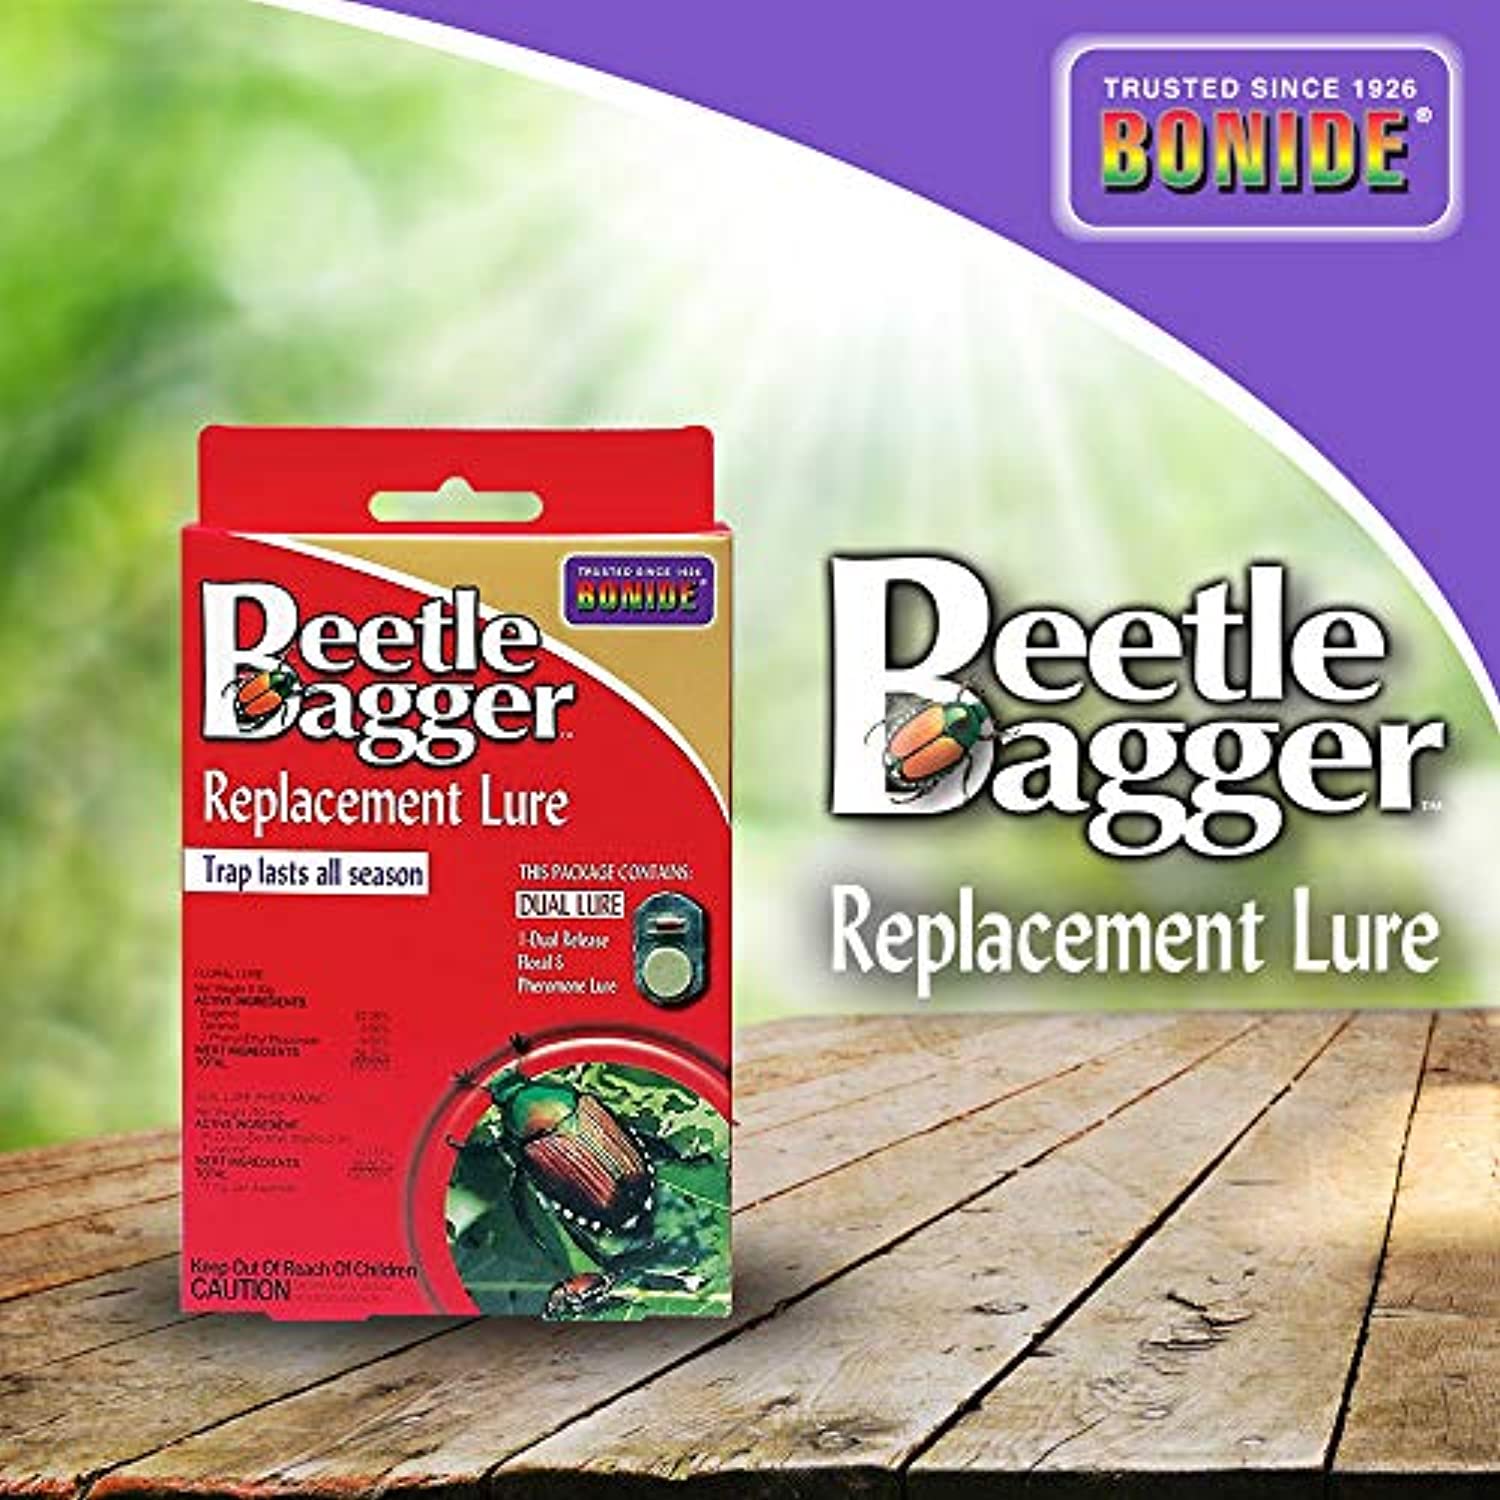 Bonide Beetle Bagger Replacement Dual Release Lure (For Japanese Beetle Traps)